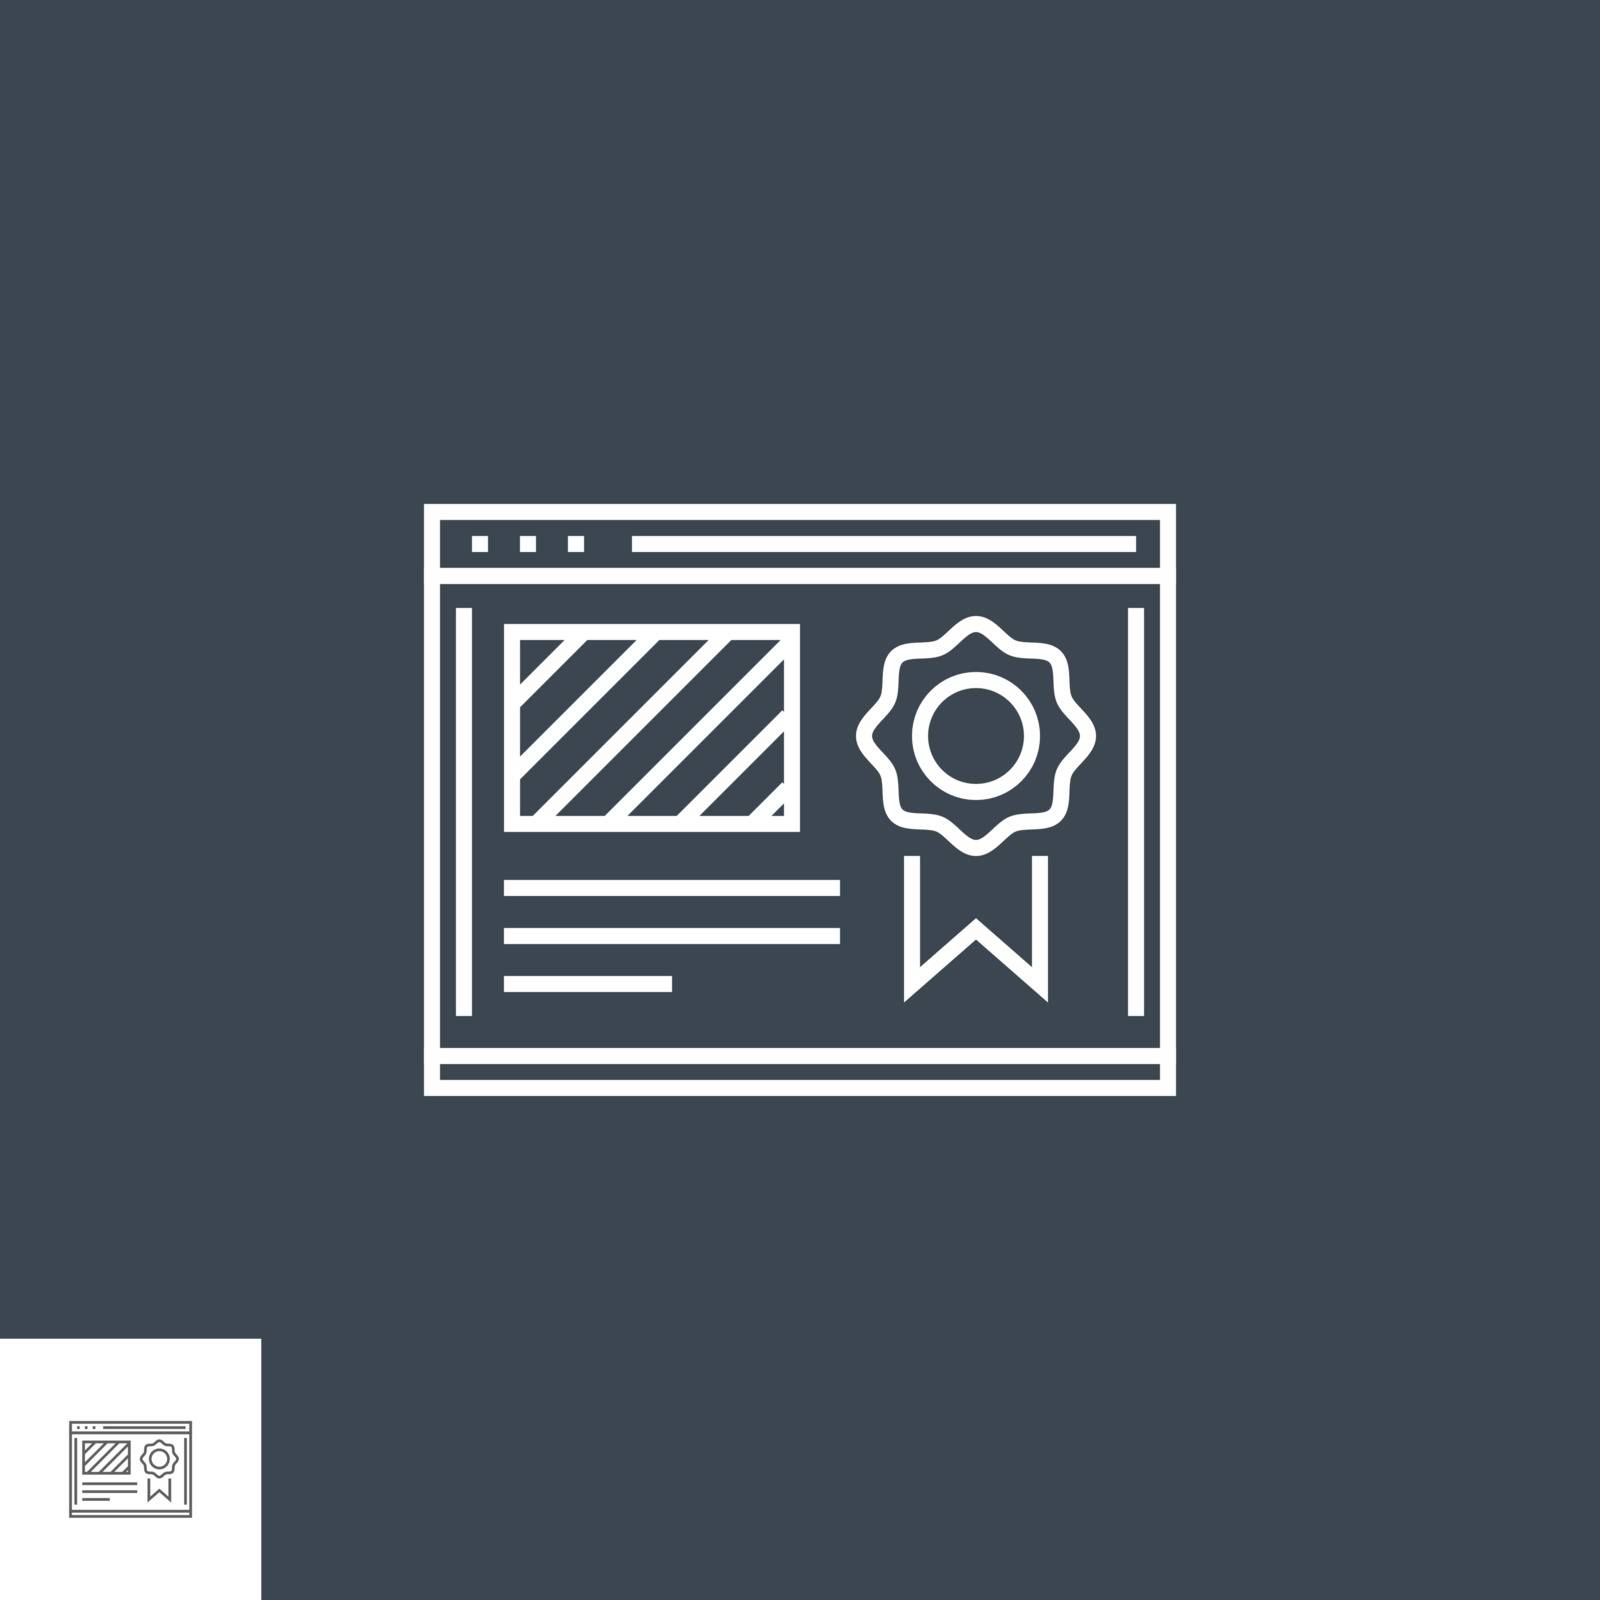 Website Ranking Related Vector Thin Line Icon. Isolated on Black Background. Editable Stroke. Vector Illustration.